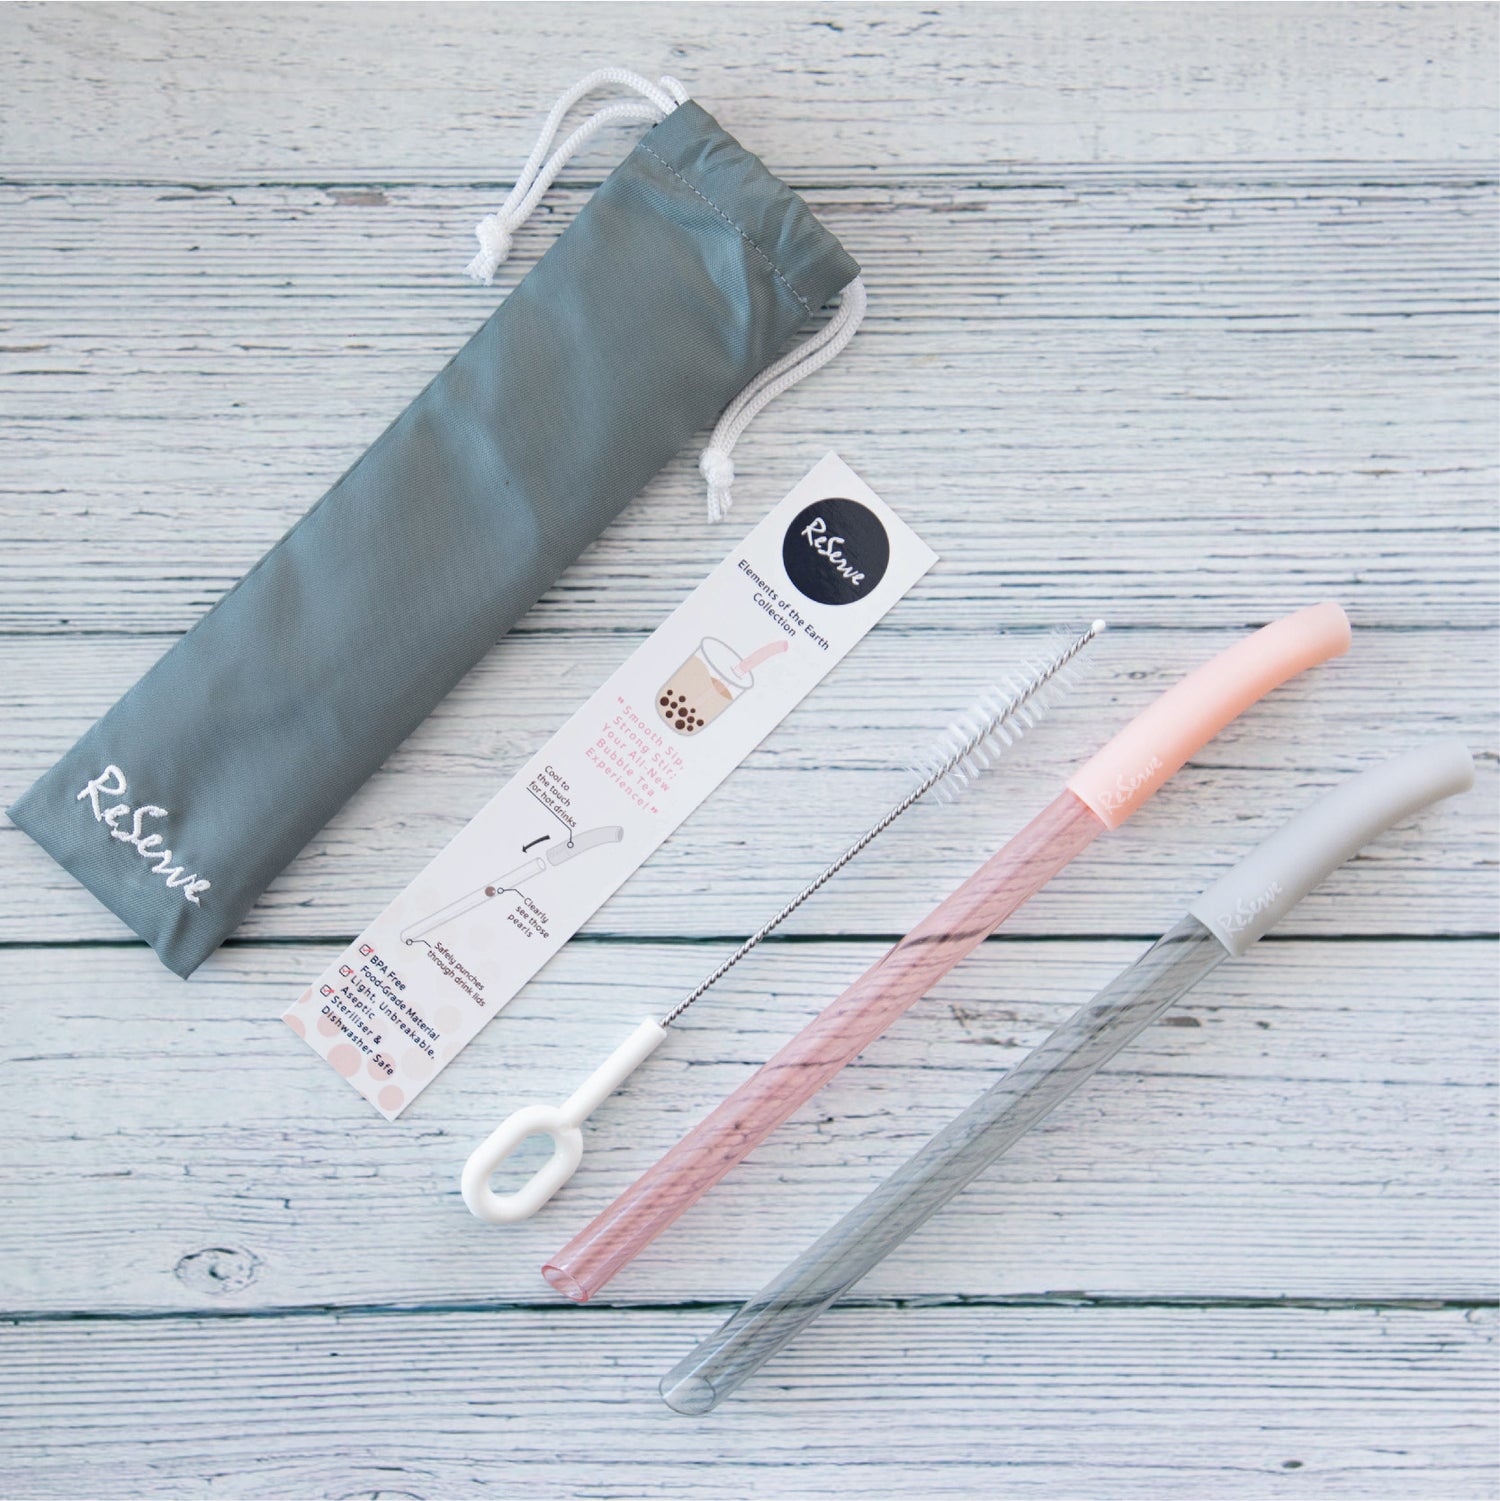 A set of 2 bubble tea straws: silver and rose gold colors. Comes with cleaning brush and reusable bag.